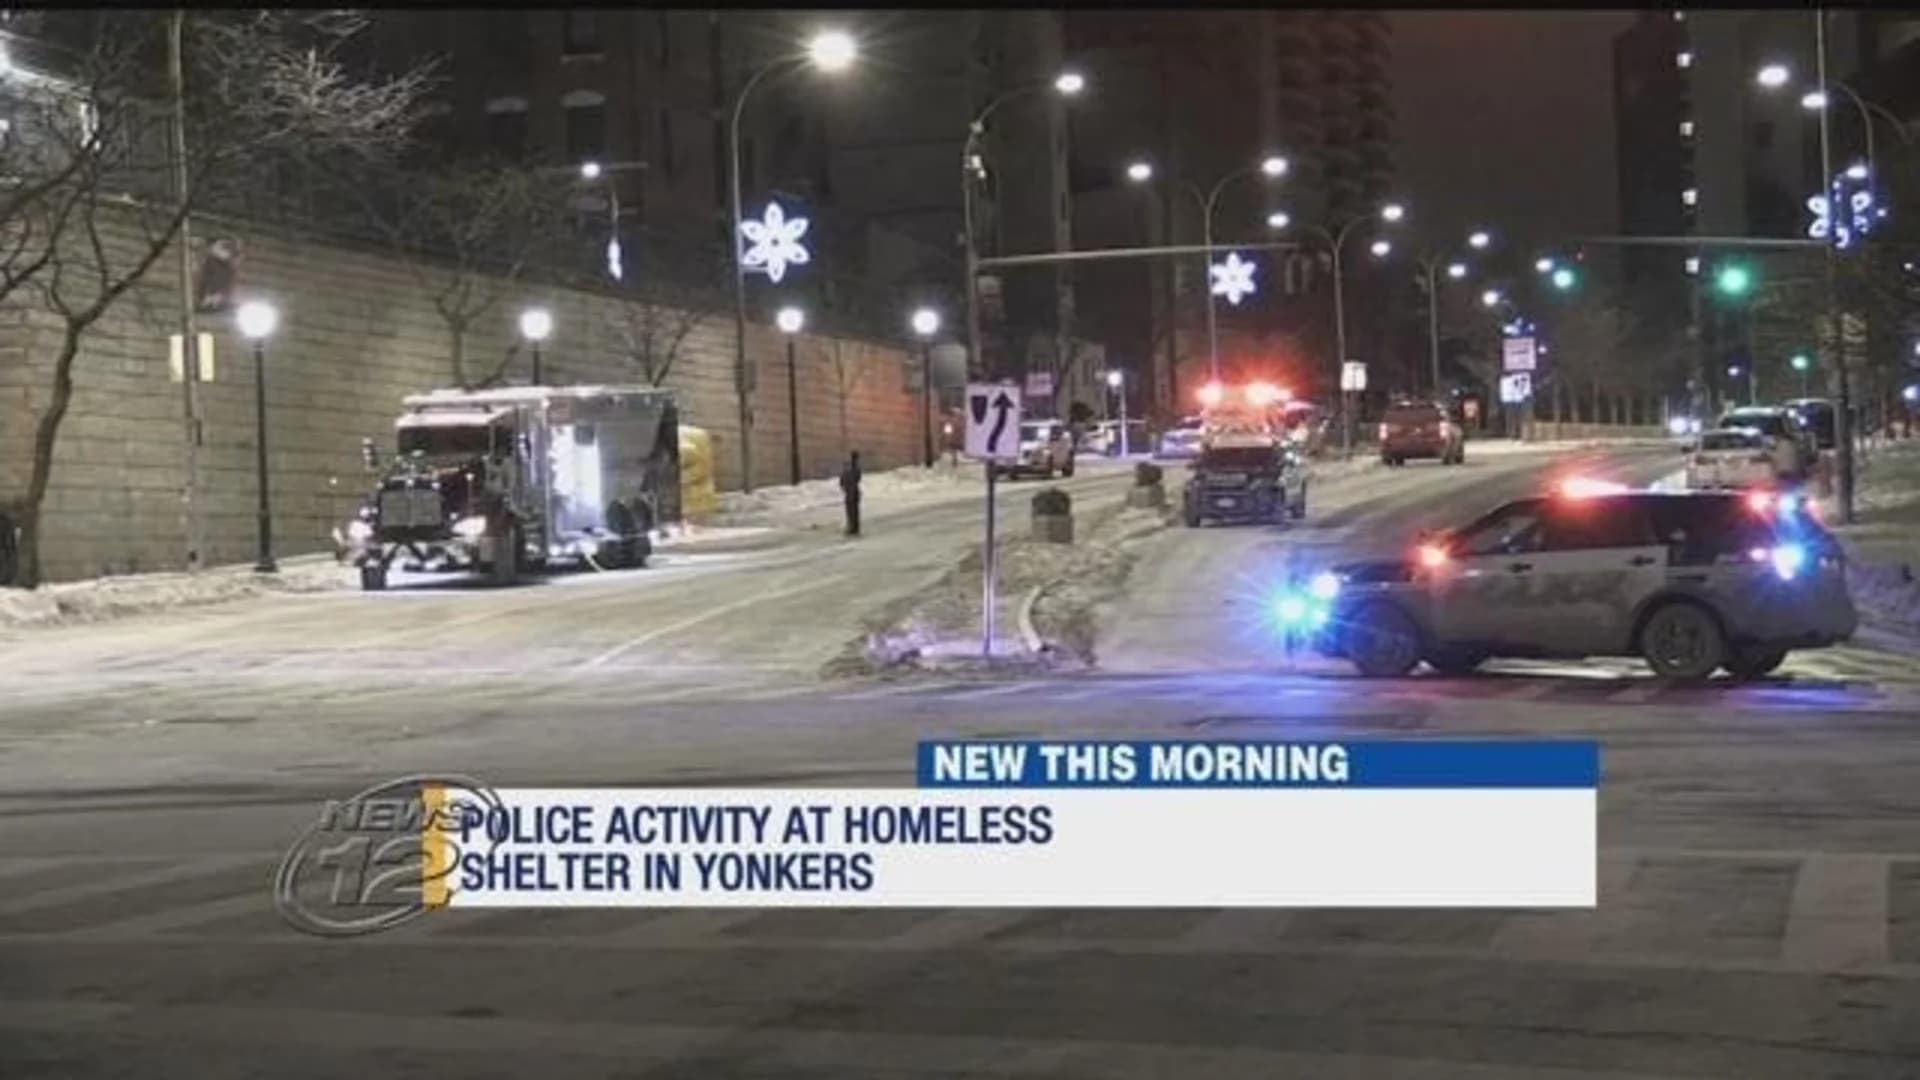 Police: Emotionally disturbed person injured at homeless shelter